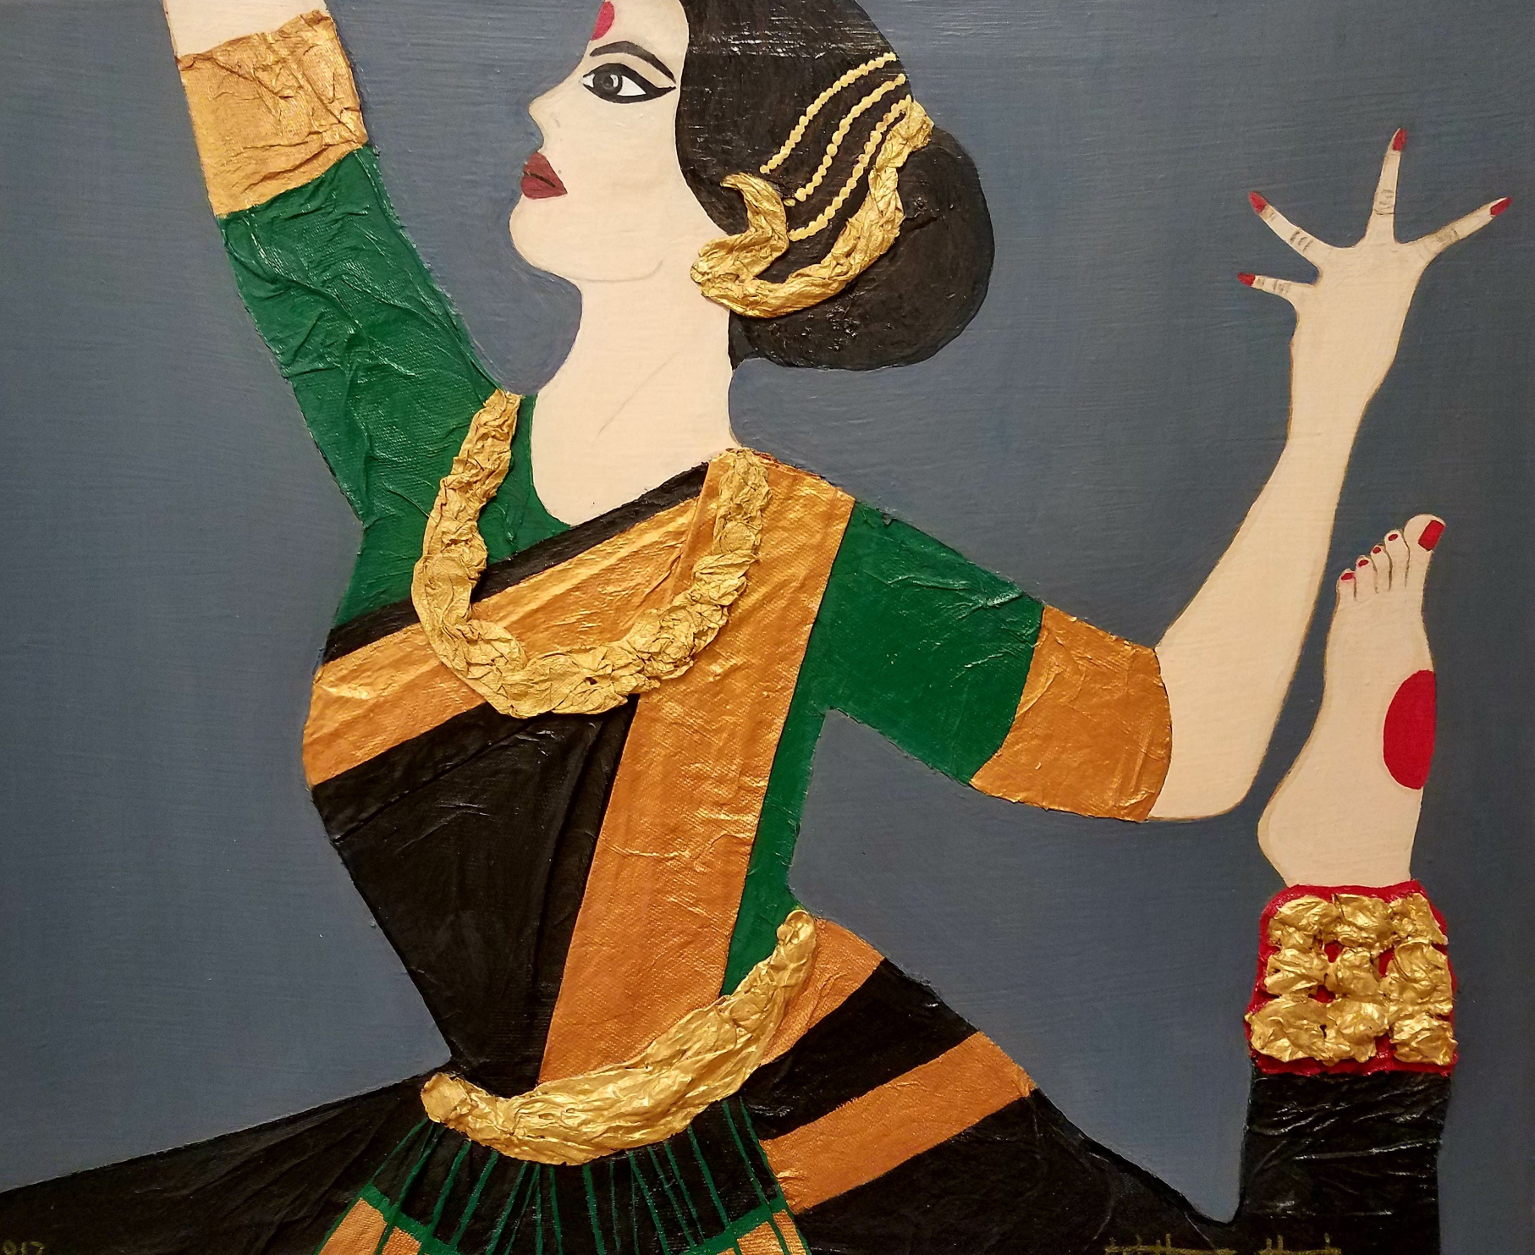 Grishma Shah's "Devadasi," courtesy of the artist and Chicago Public Library. Image description: a collage illustration of a dancer in profile. She gestures with her hands and one foot kicks up and into the frame. She is wearing a black and green sari trimmed with gold and gold jewelry.